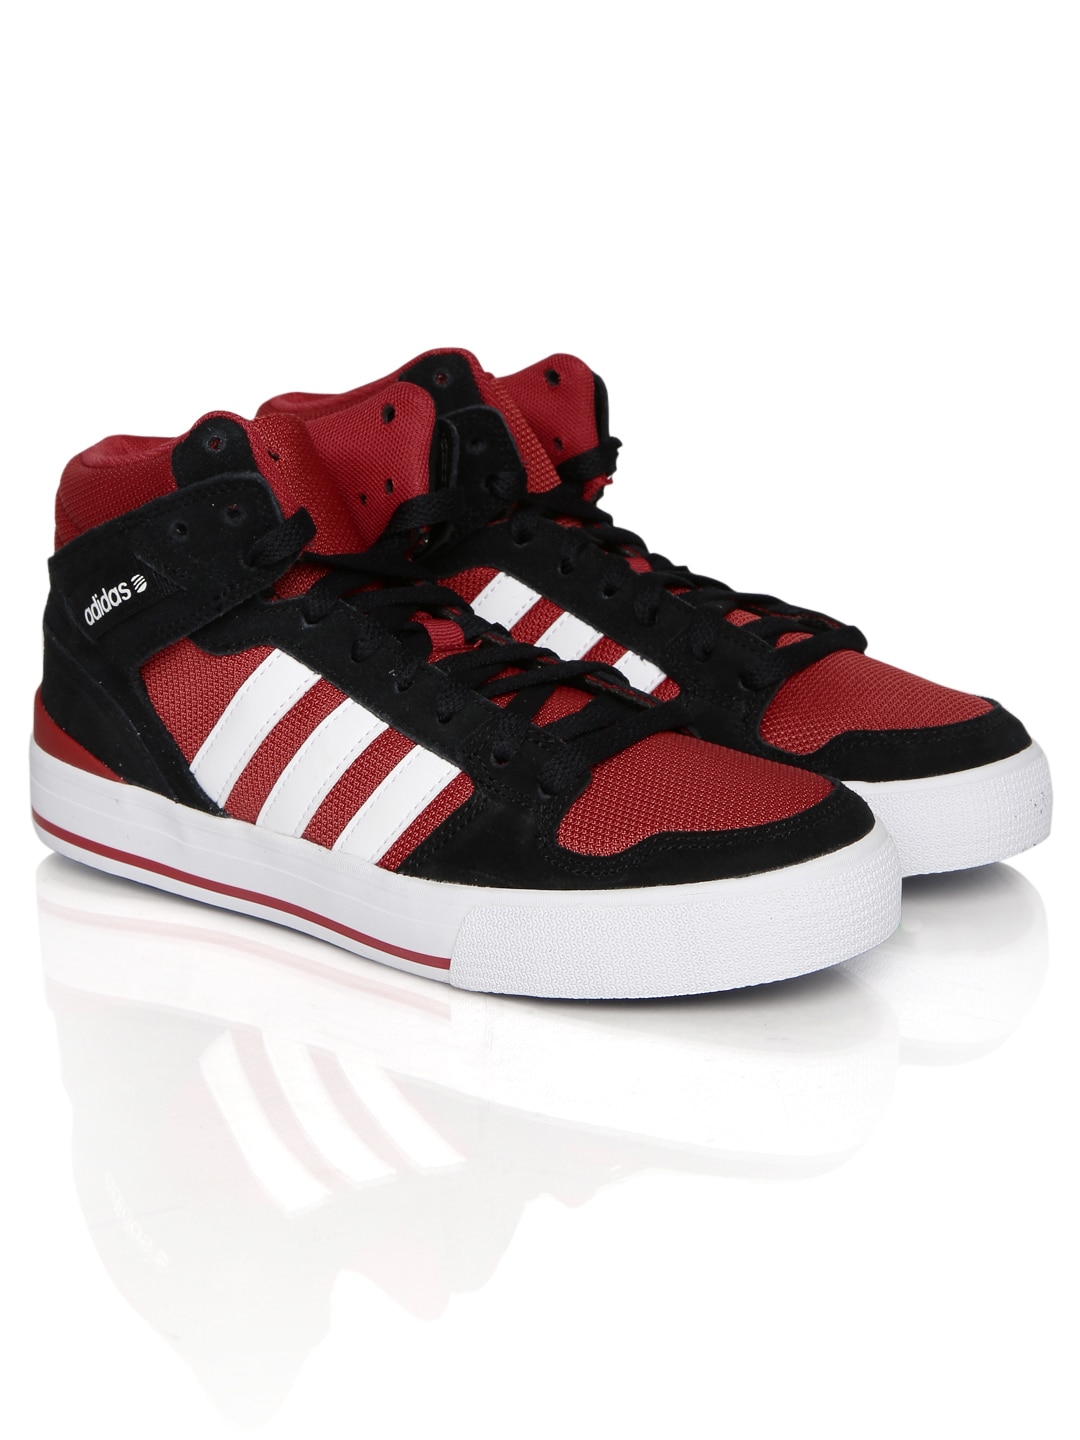 adidas neo red shoes